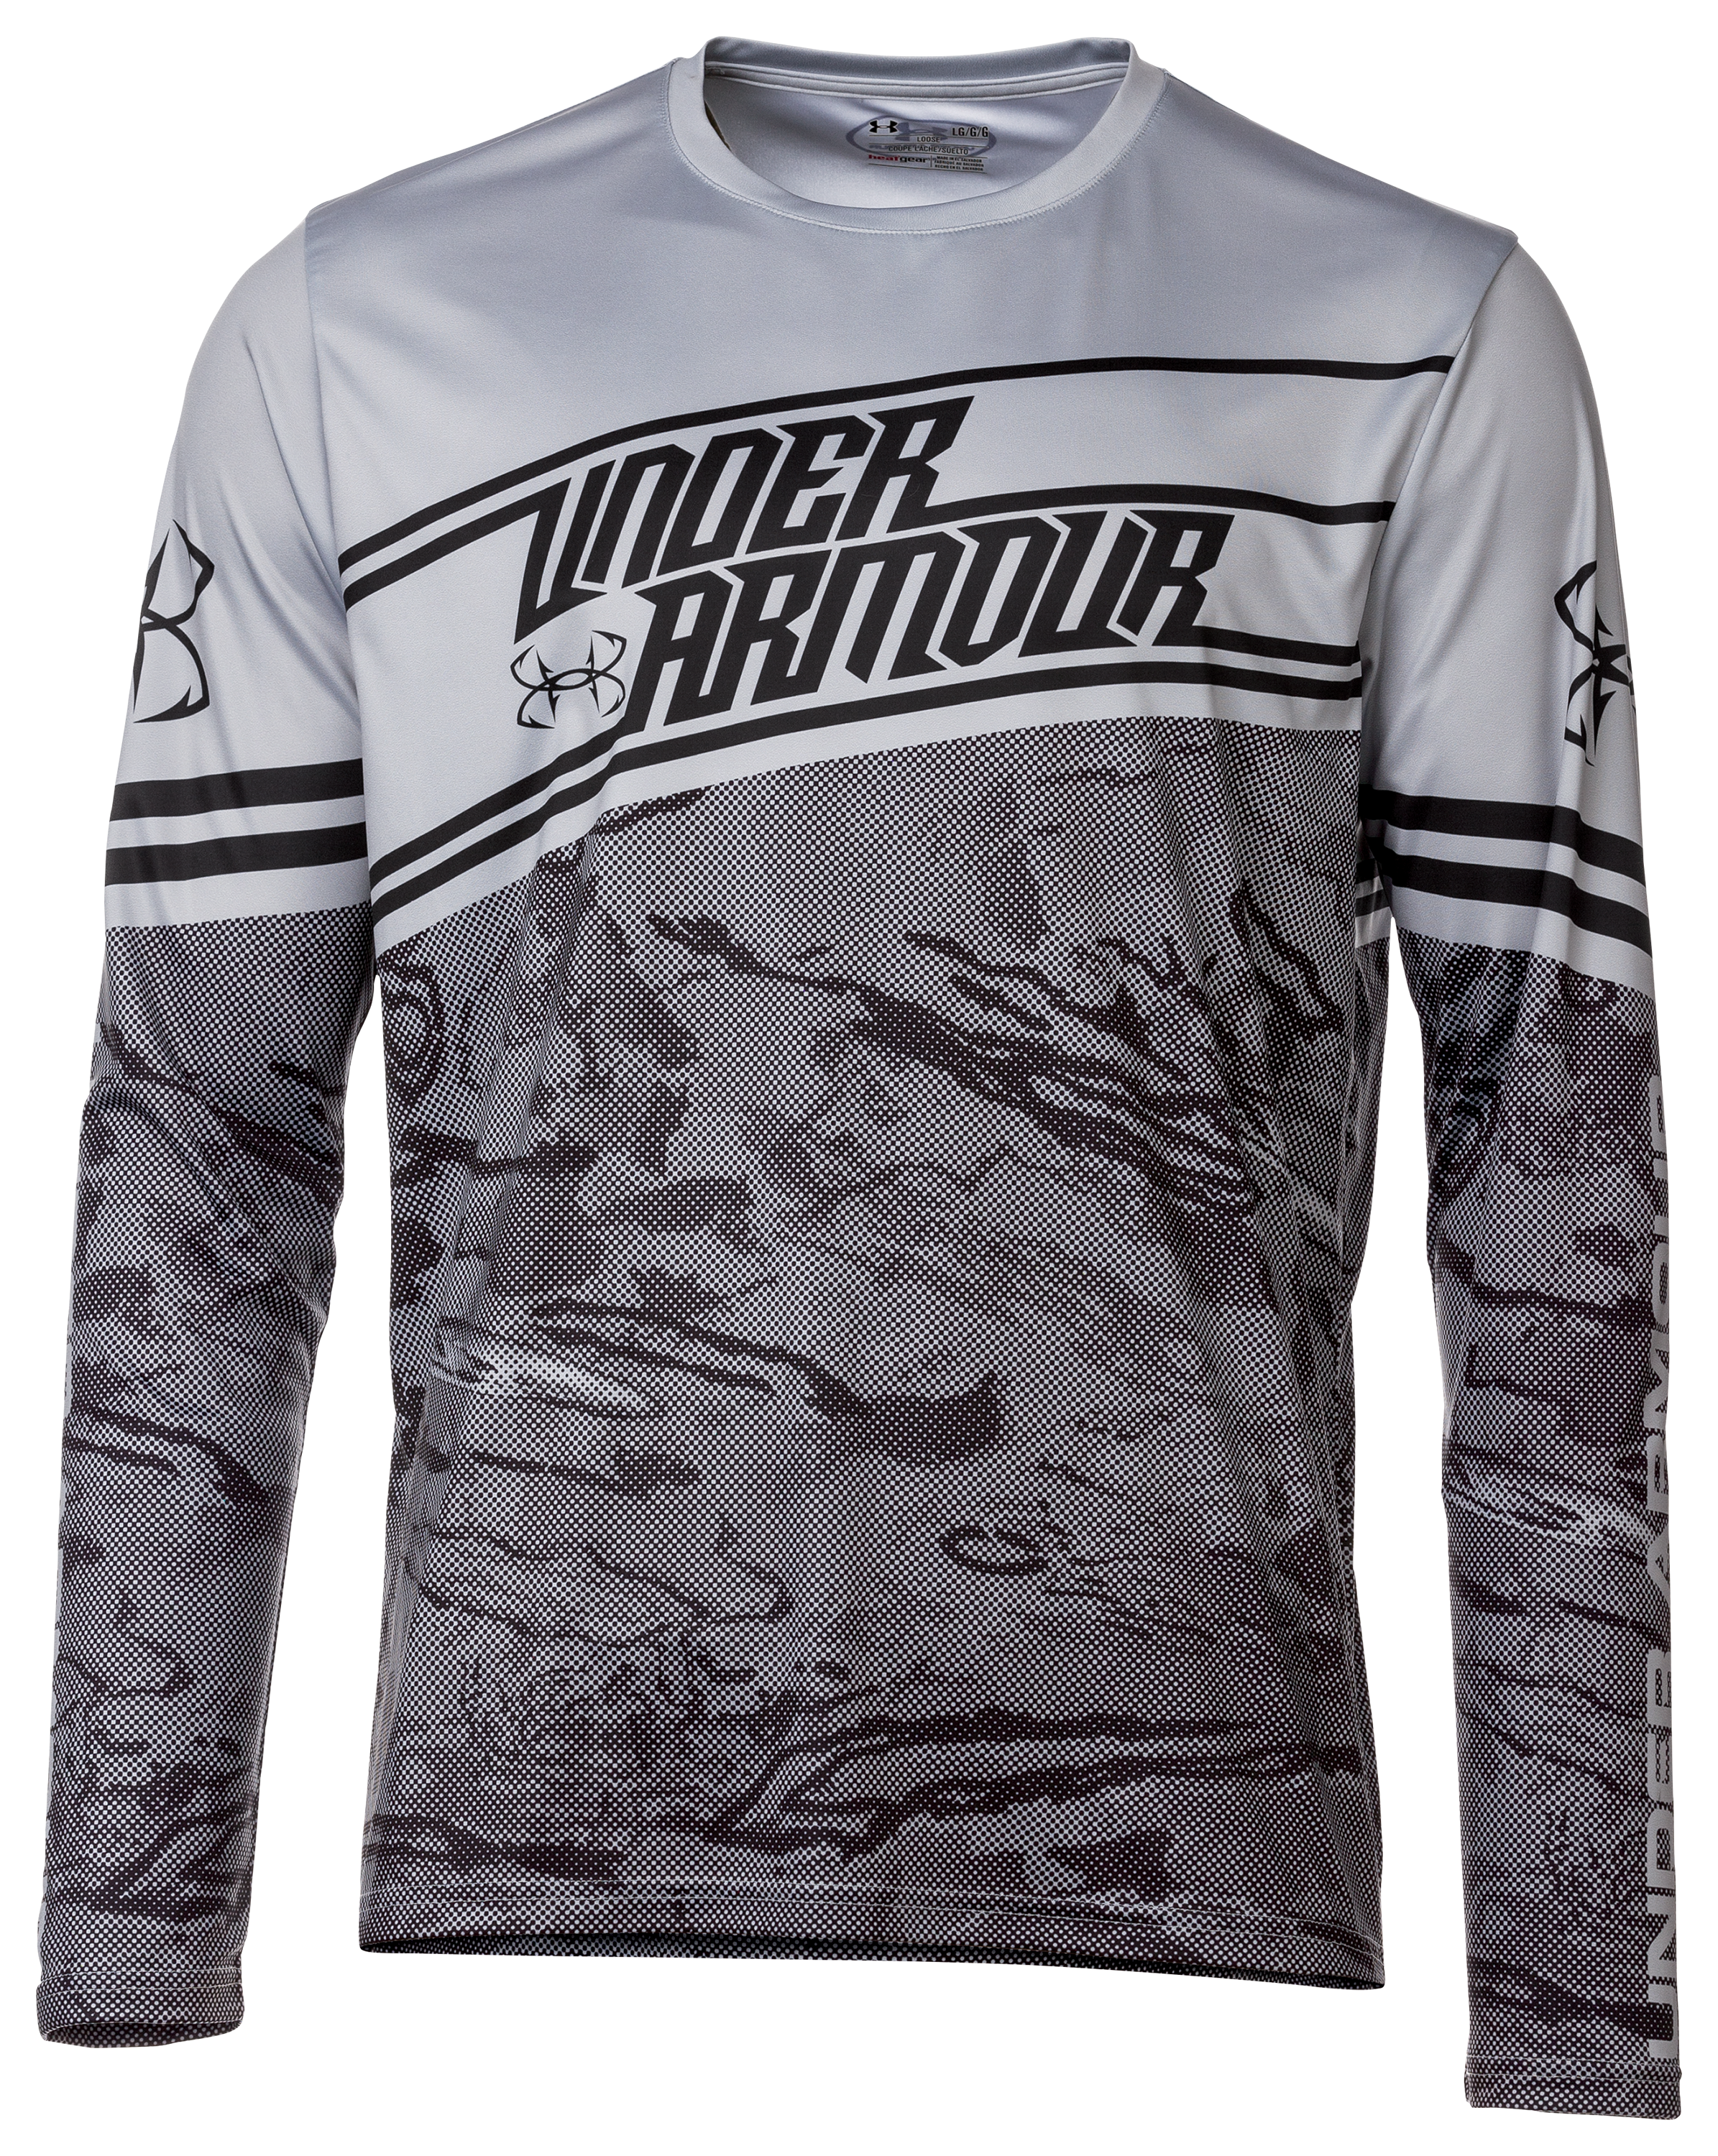 Under Armour Fishing Jersey Shirt for Men